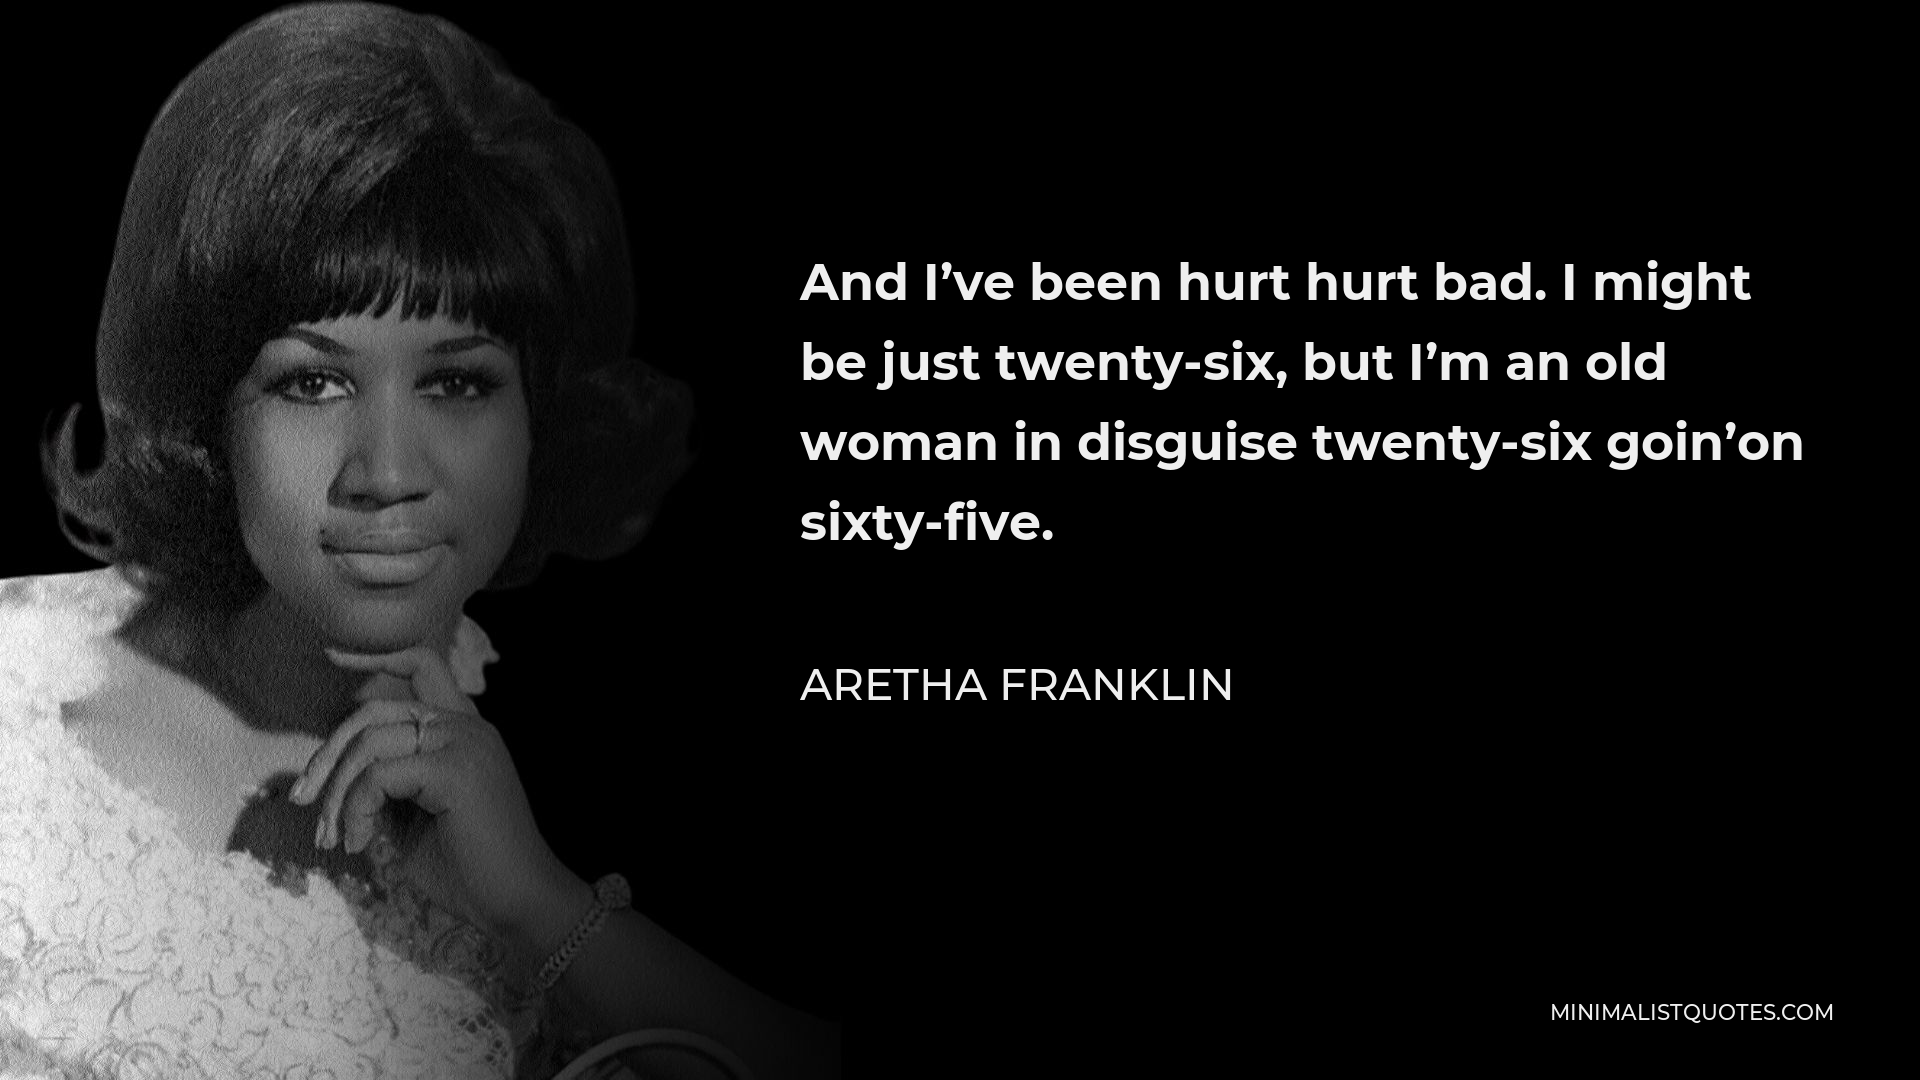 Aretha Franklin Quote - And I’ve been hurt hurt bad. I might be just twenty-six, but I’m an old woman in disguise twenty-six goin’on sixty-five.